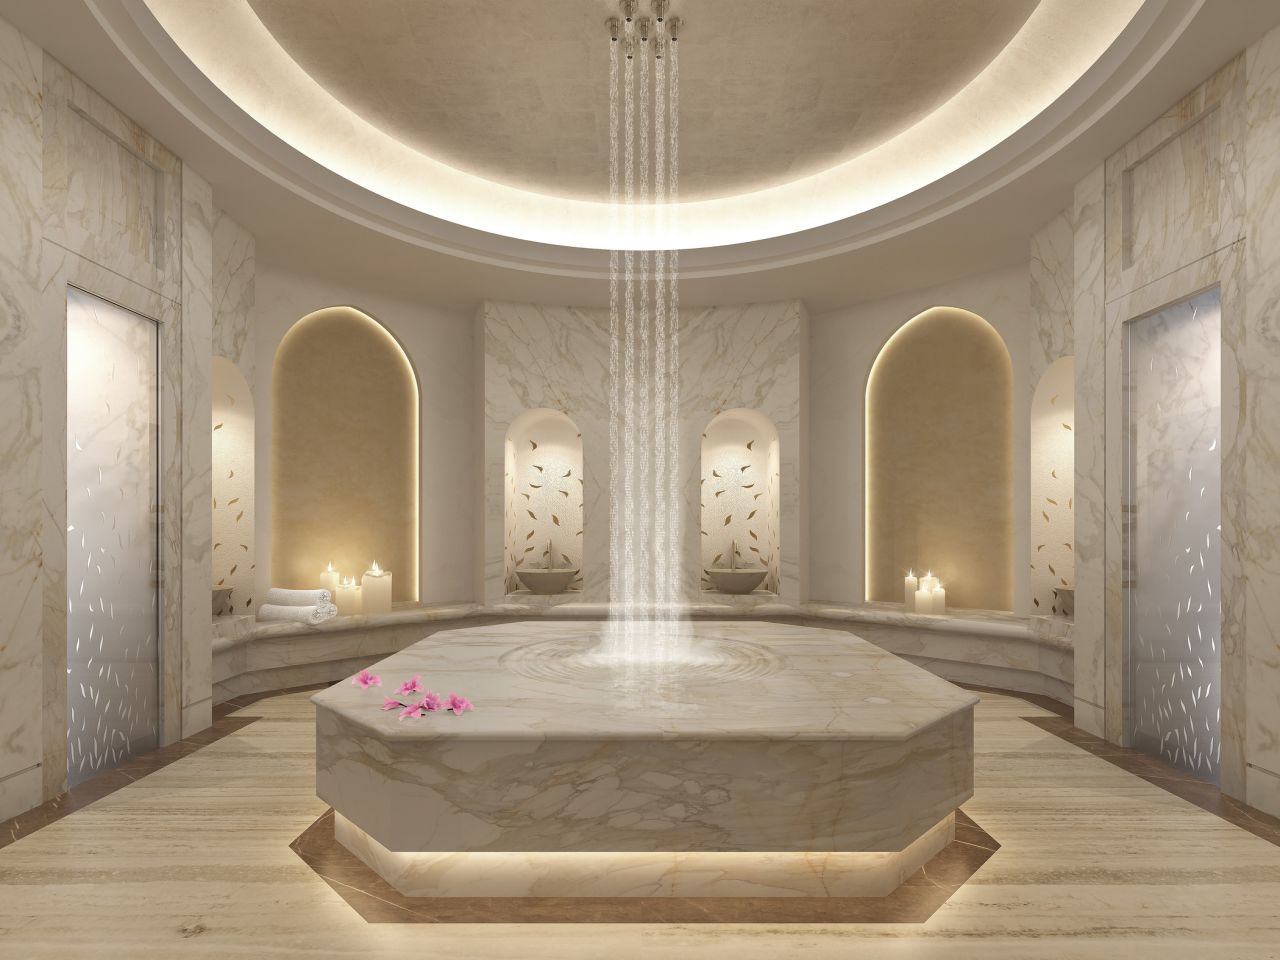 Opening in July, St Regis Astana will tap into Astana's rich spa culture.